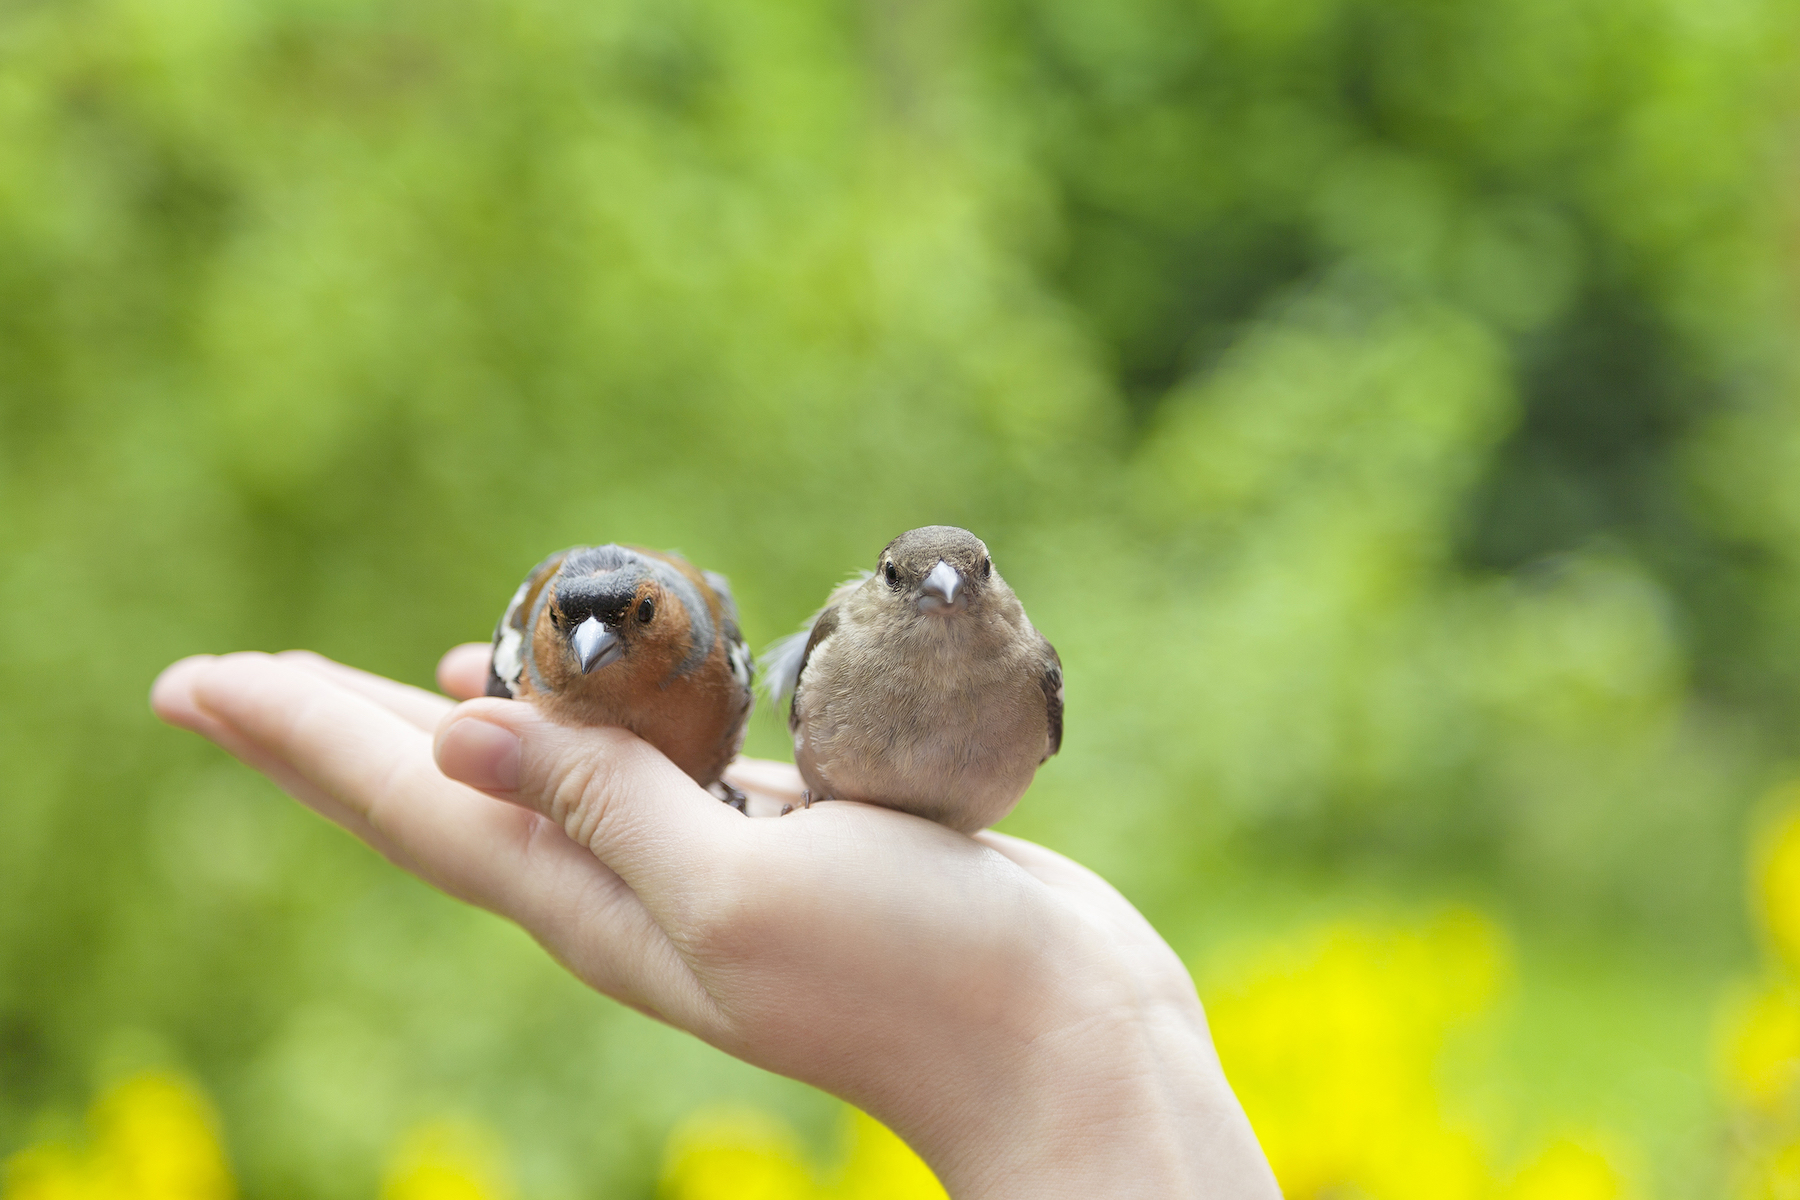 Two birds resting in a human hand.